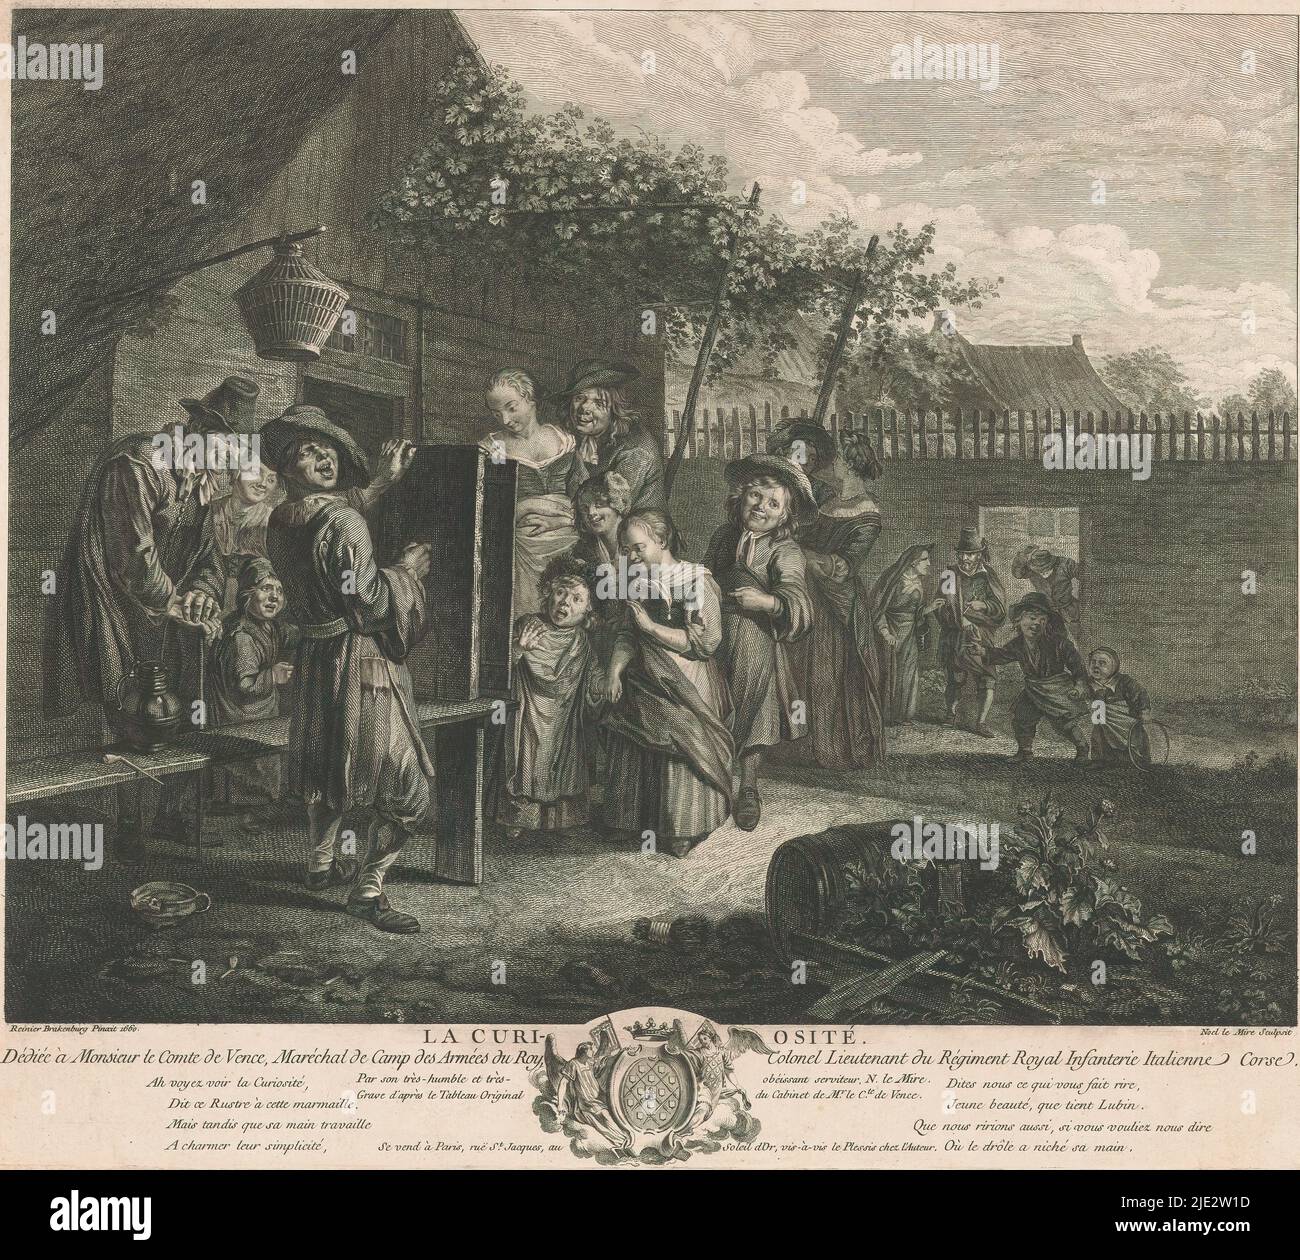 Curiosity, La curiosité (title on object), In a courtyard in front of a farmhouse or inn, a man stands with a viewing box. Around him men, women and children have gathered. In the background, a child with a hoop approaches. Below the image an eight-line caption and the coat of arms of Claude Alexander de Villeneuve, Count of Vence, with an angel on either side., print maker: Noël Le Mire, (mentioned on object), after painting by: Reinier Brakenburg, (mentioned on object), Noël Le Mire, (mentioned on object), Paris, 1734 - 1801, paper, etching, engraving, height 353 mm × width 396 mm Stock Photo